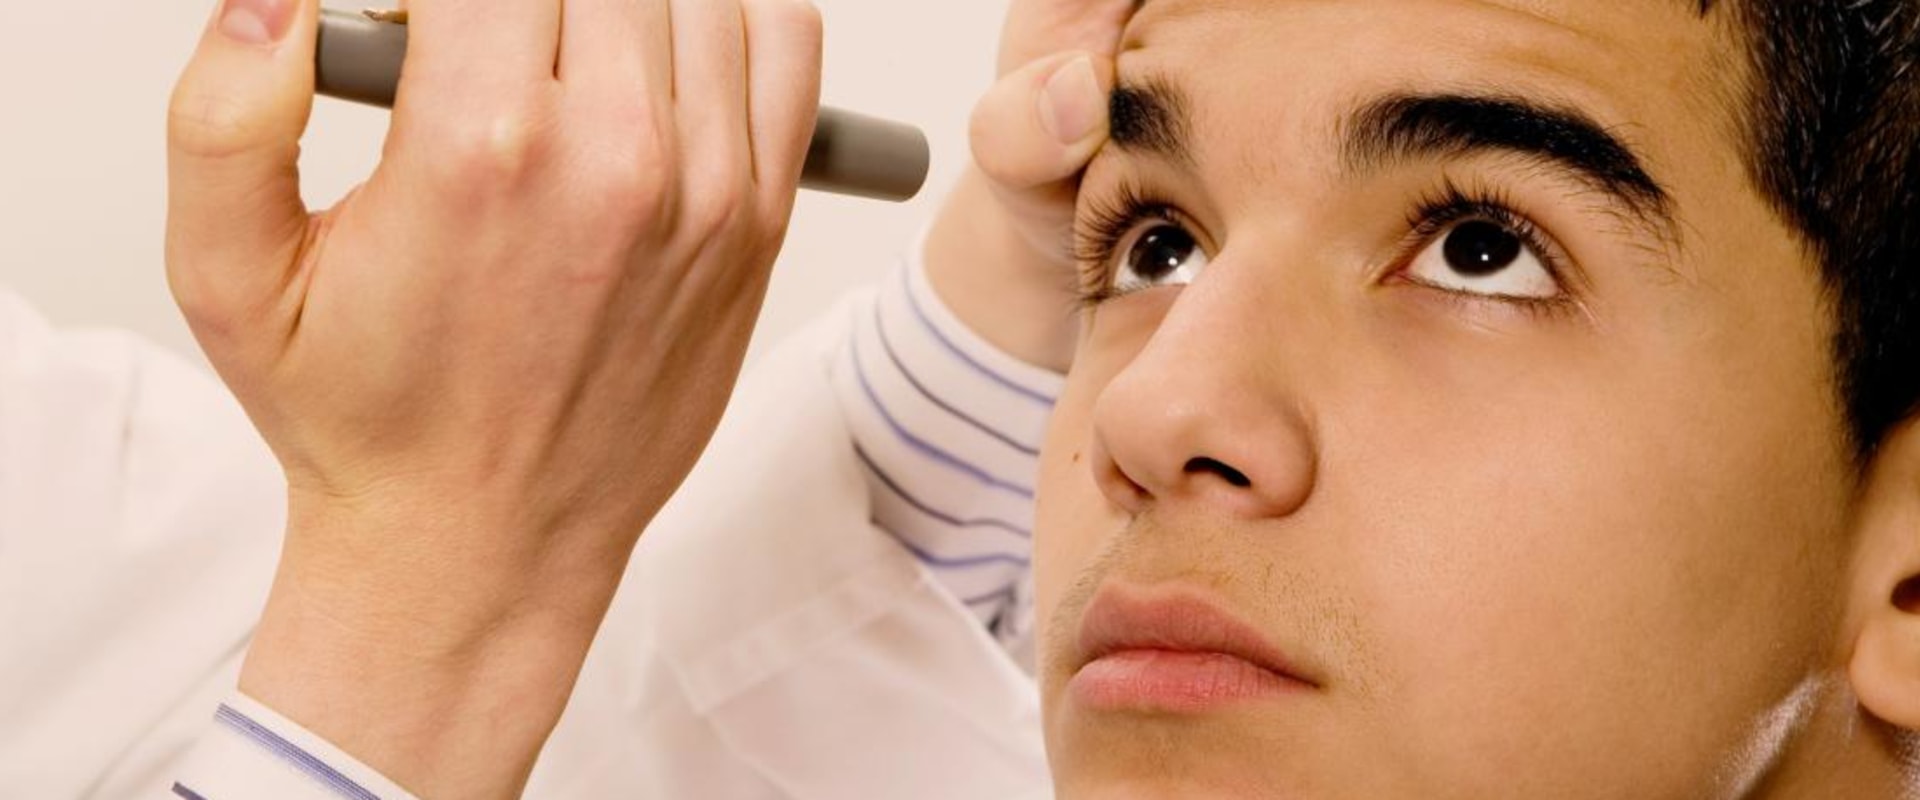 What Are the Normal Results of an Eye Exam?